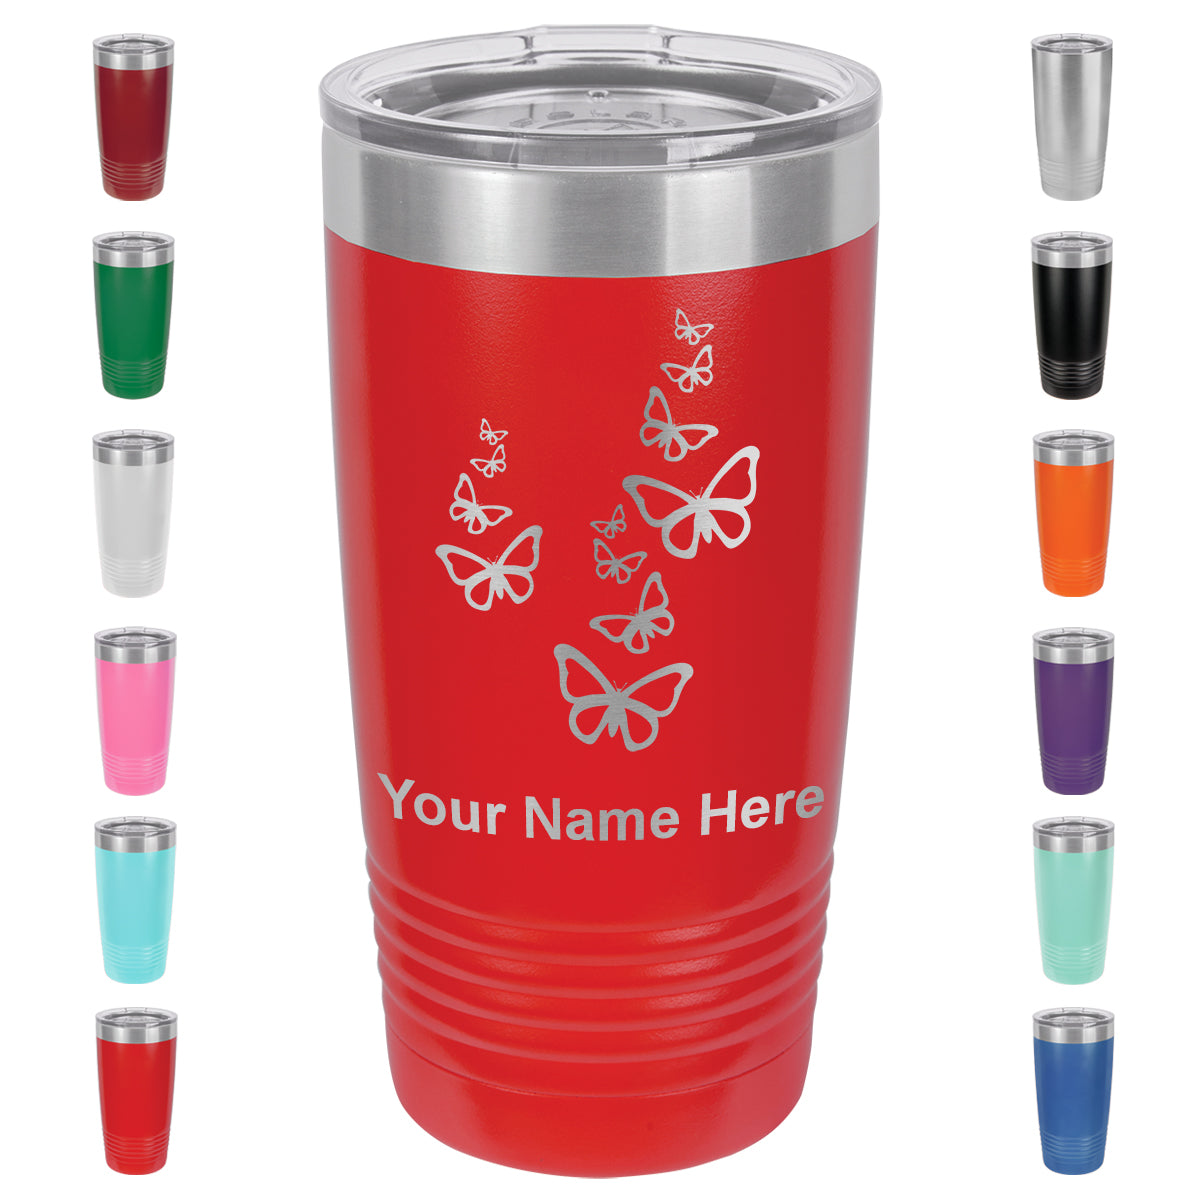 20oz Vacuum Insulated Tumbler Mug, Butterflies, Personalized Engraving Included